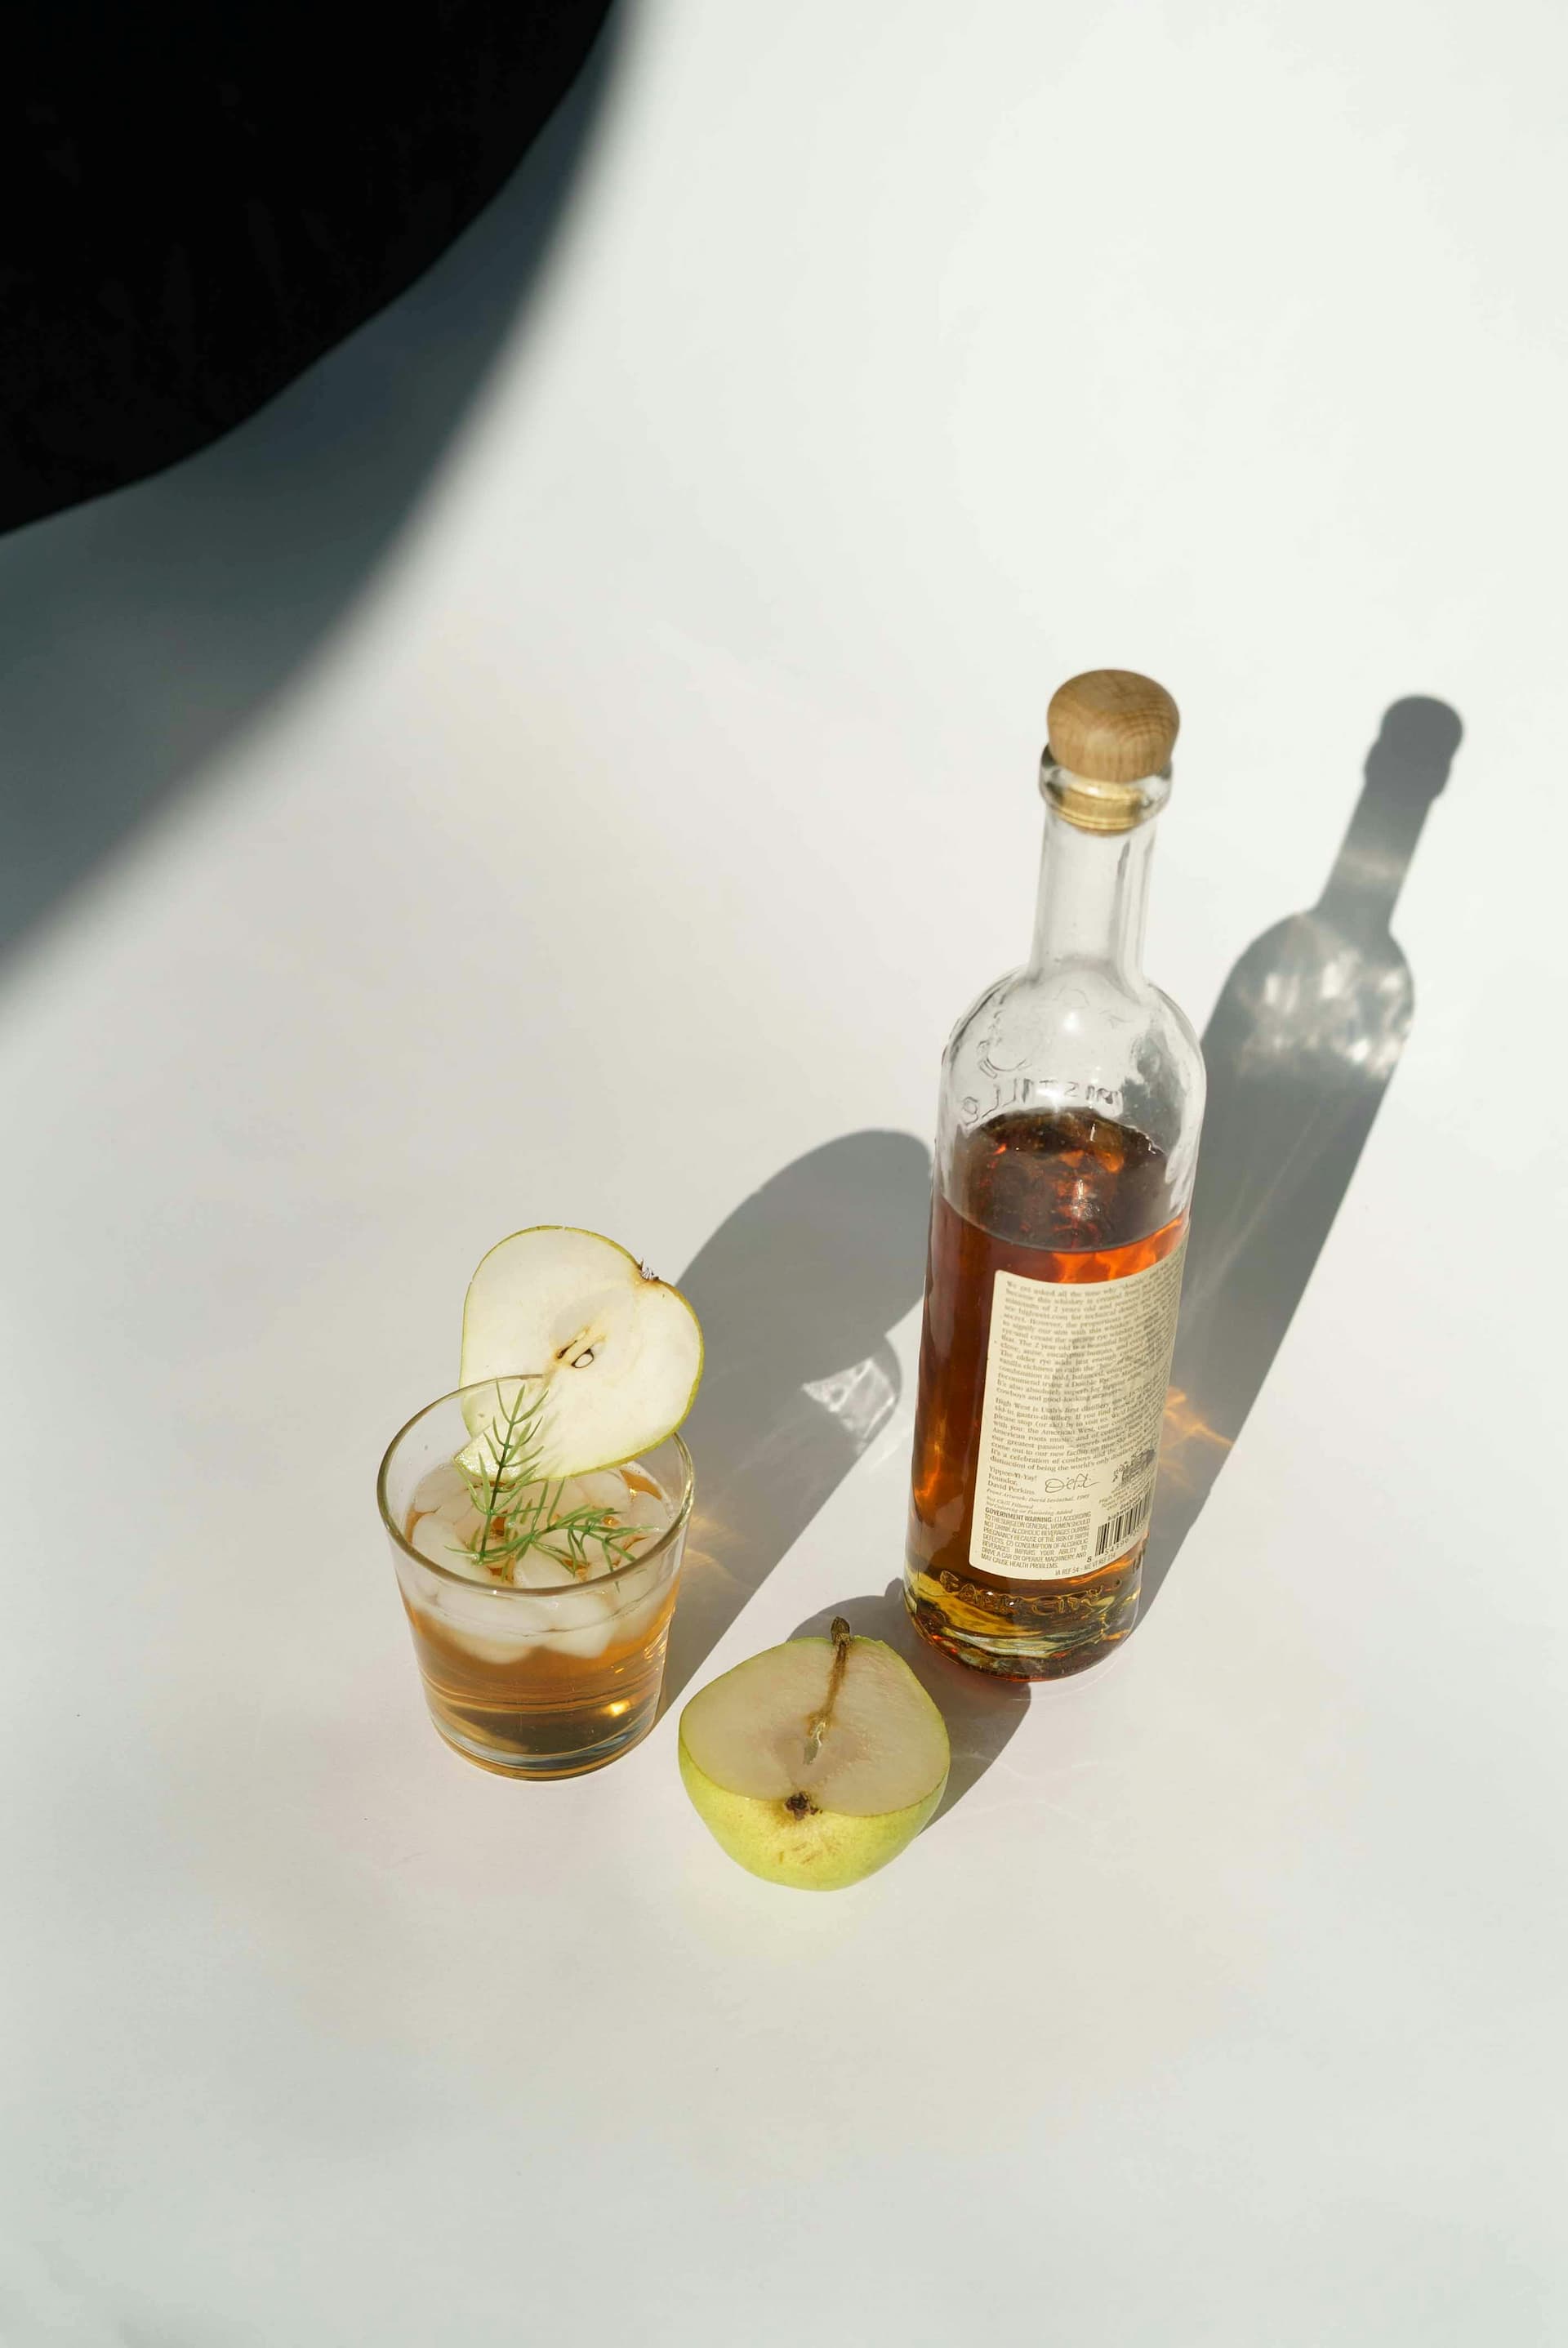 Six Pear Liqueur and Spirit Pairings That Will Elevate Your Home Mixology Game